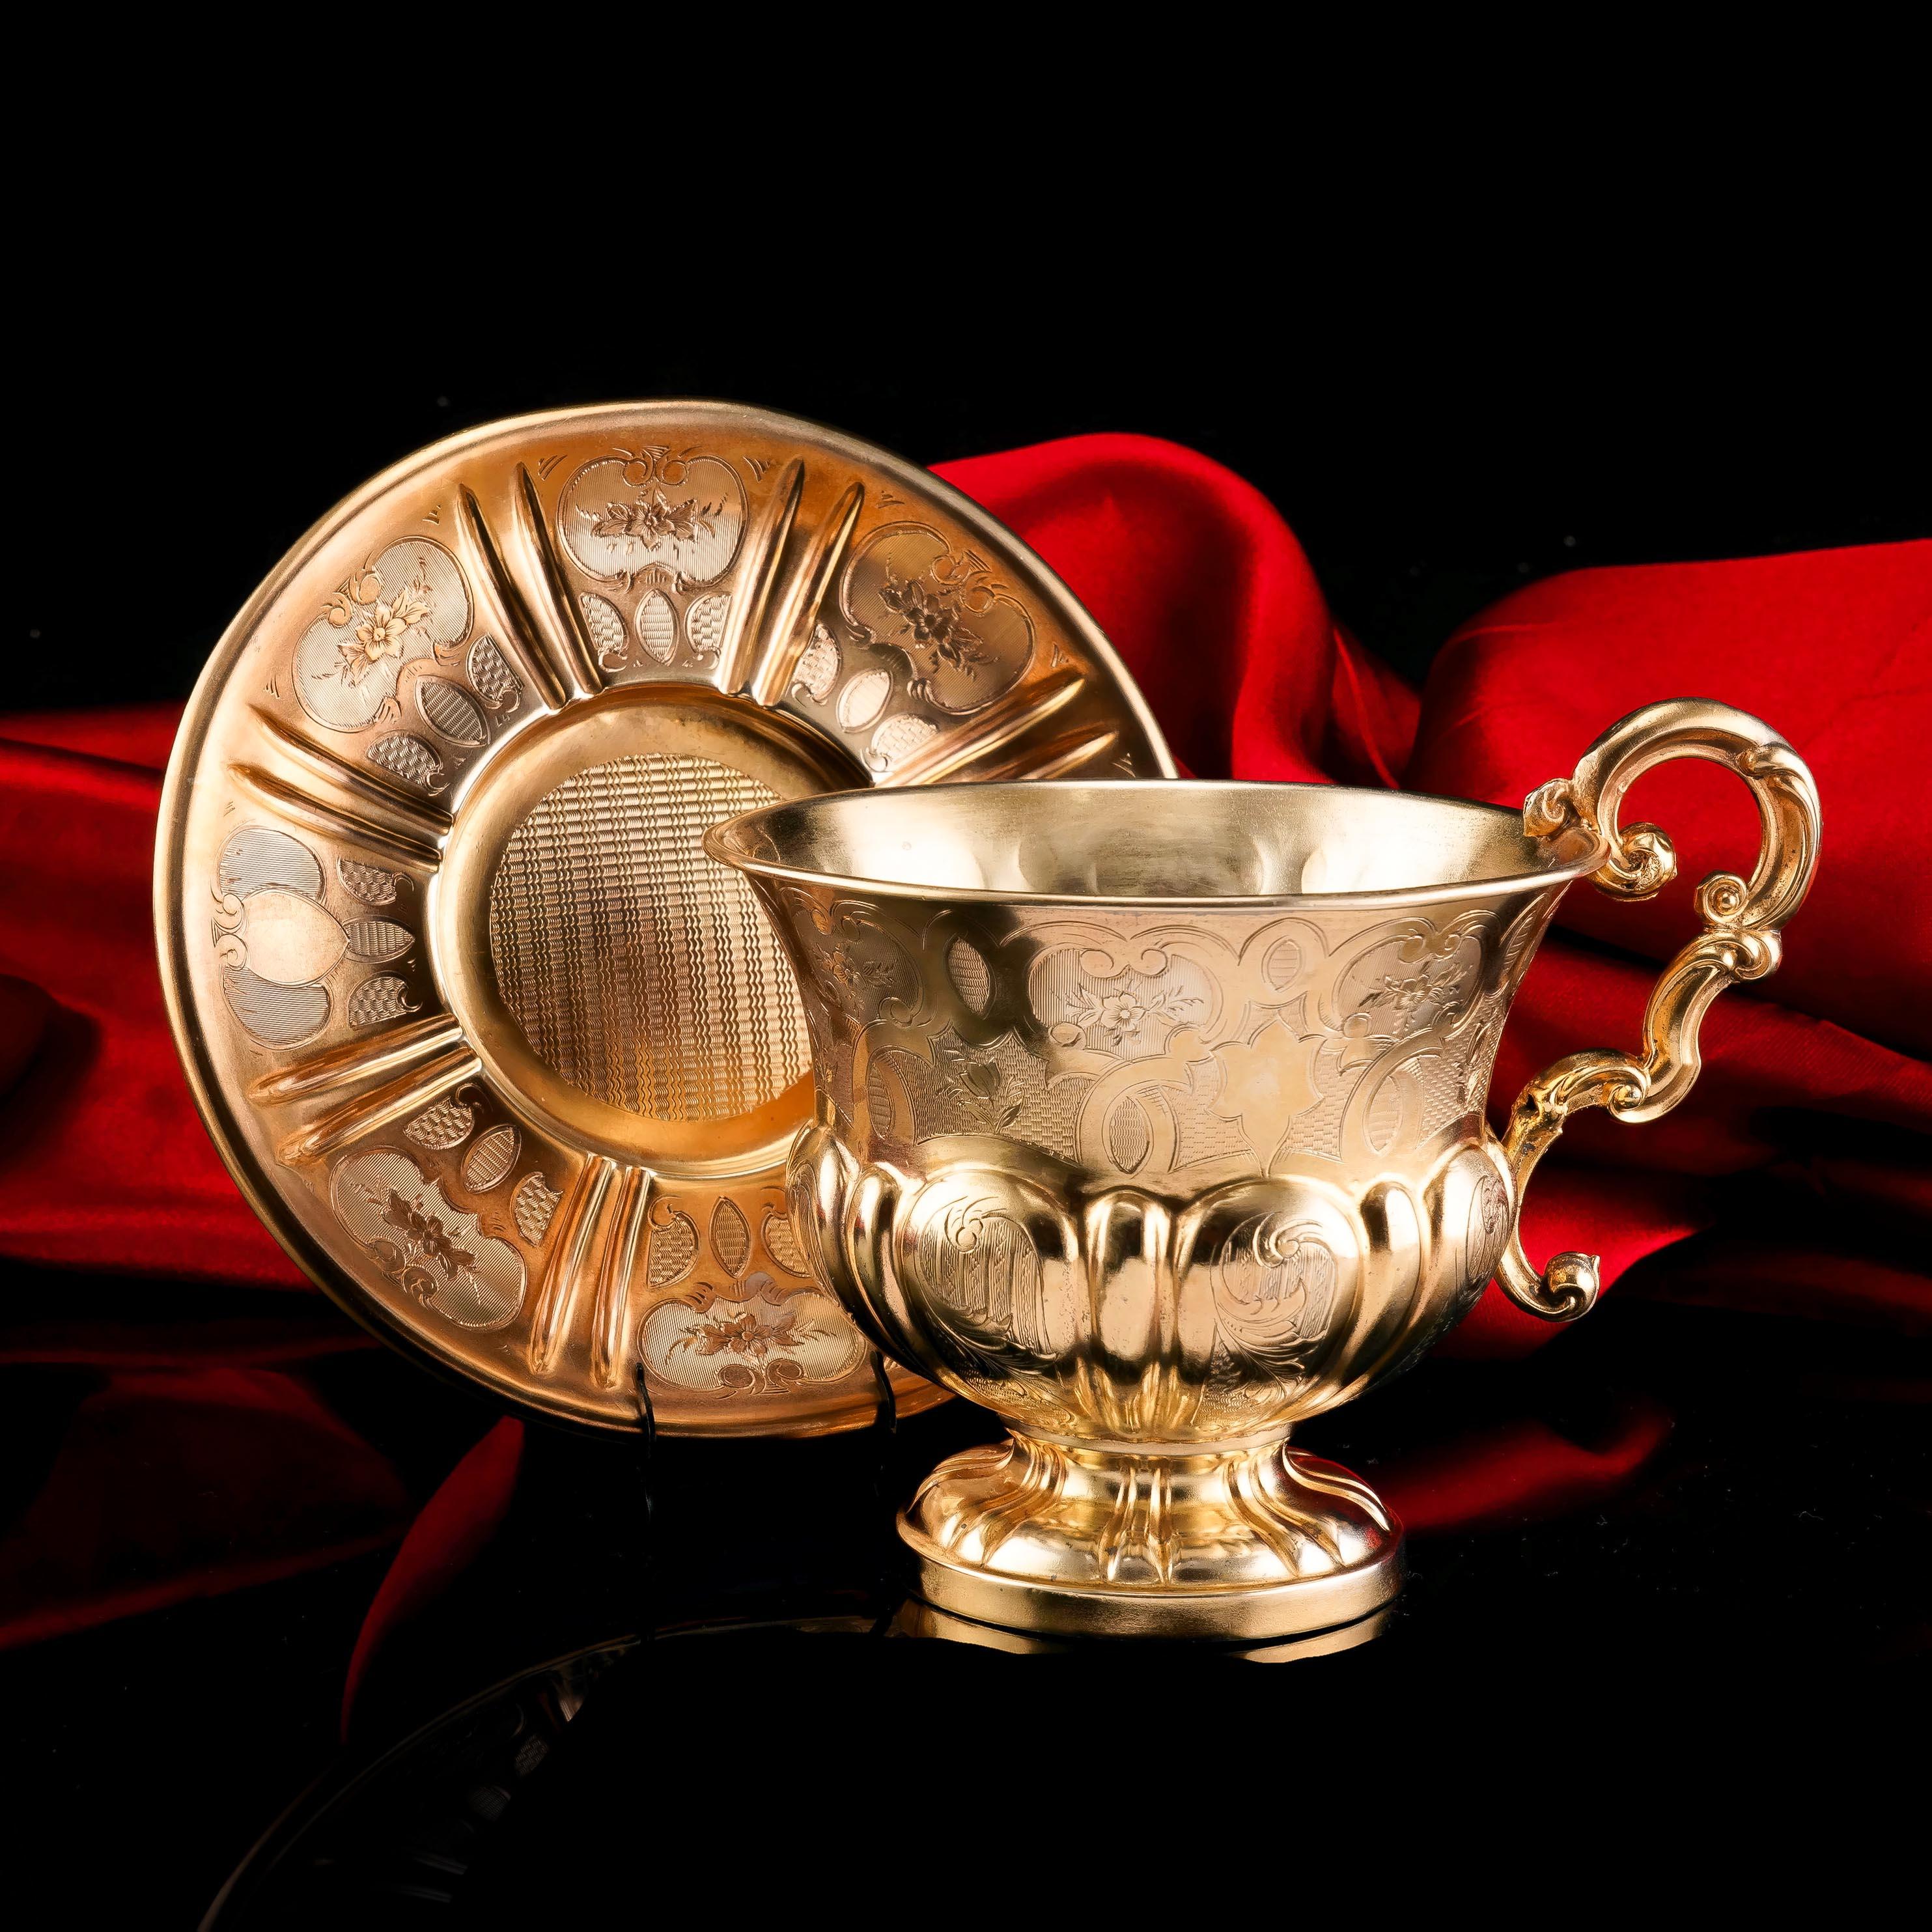 We are delighted to offer this magnificent solid silver gilt cup and saucer made c.1880s, possibly French. Both pieces are unmarked leaving us only with clues such as their shape and engraved decorations to deduce their age and origin, however, we